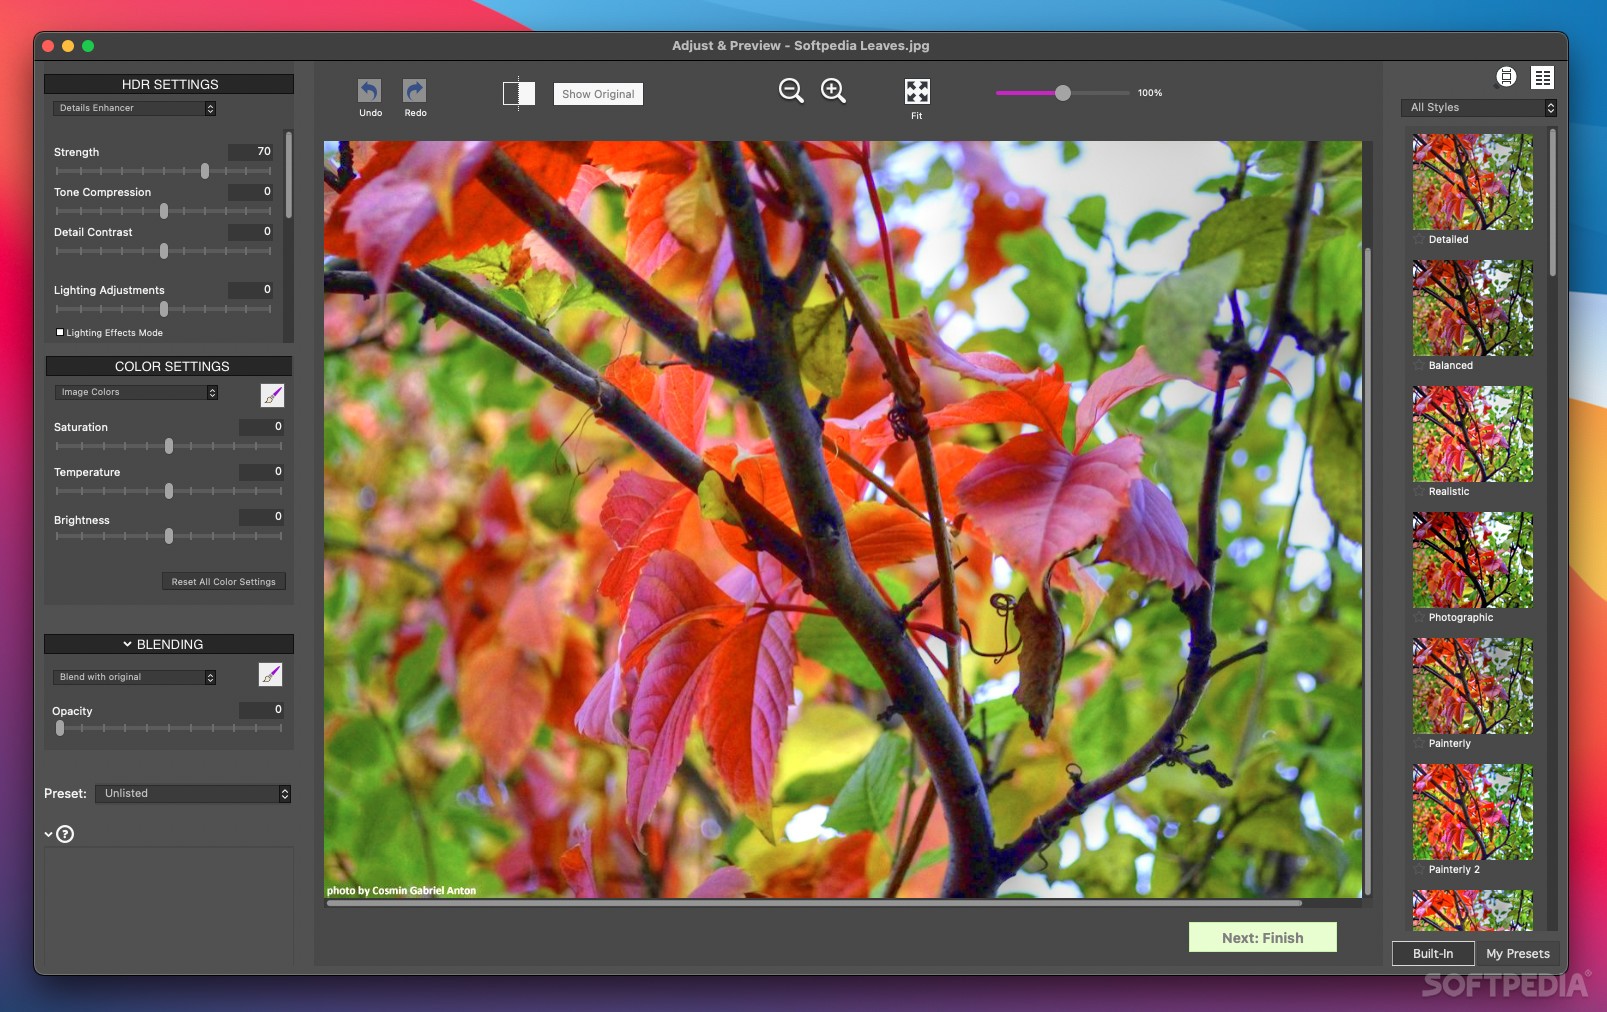 download the last version for ipod HDRsoft Photomatix Pro 7.1.1